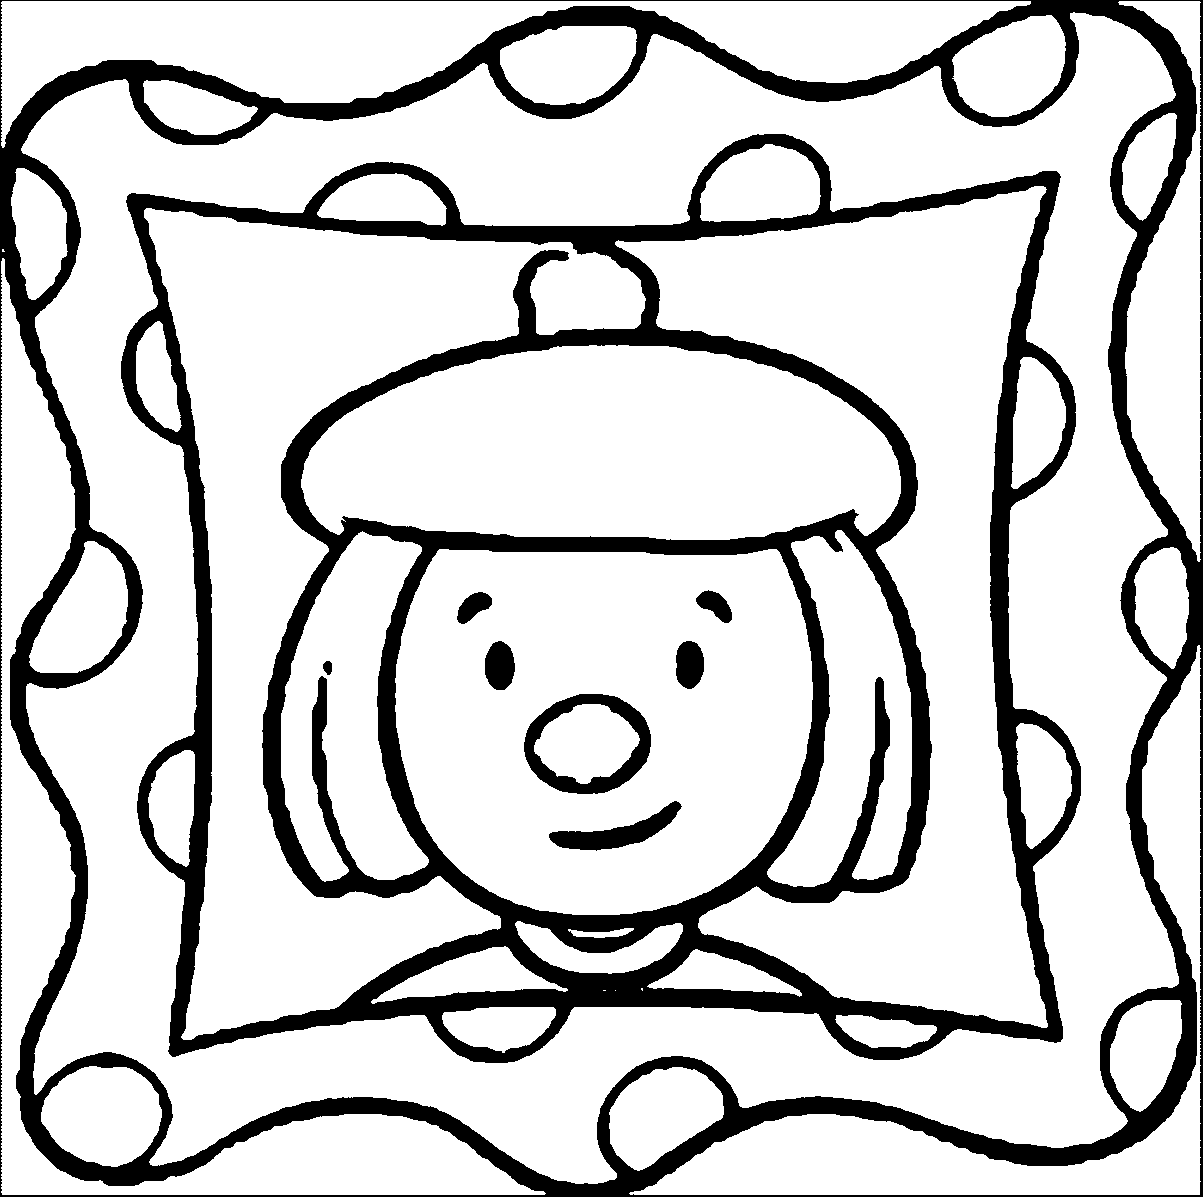 JoJo Circus Picture Coloring Page | Wecoloringpage